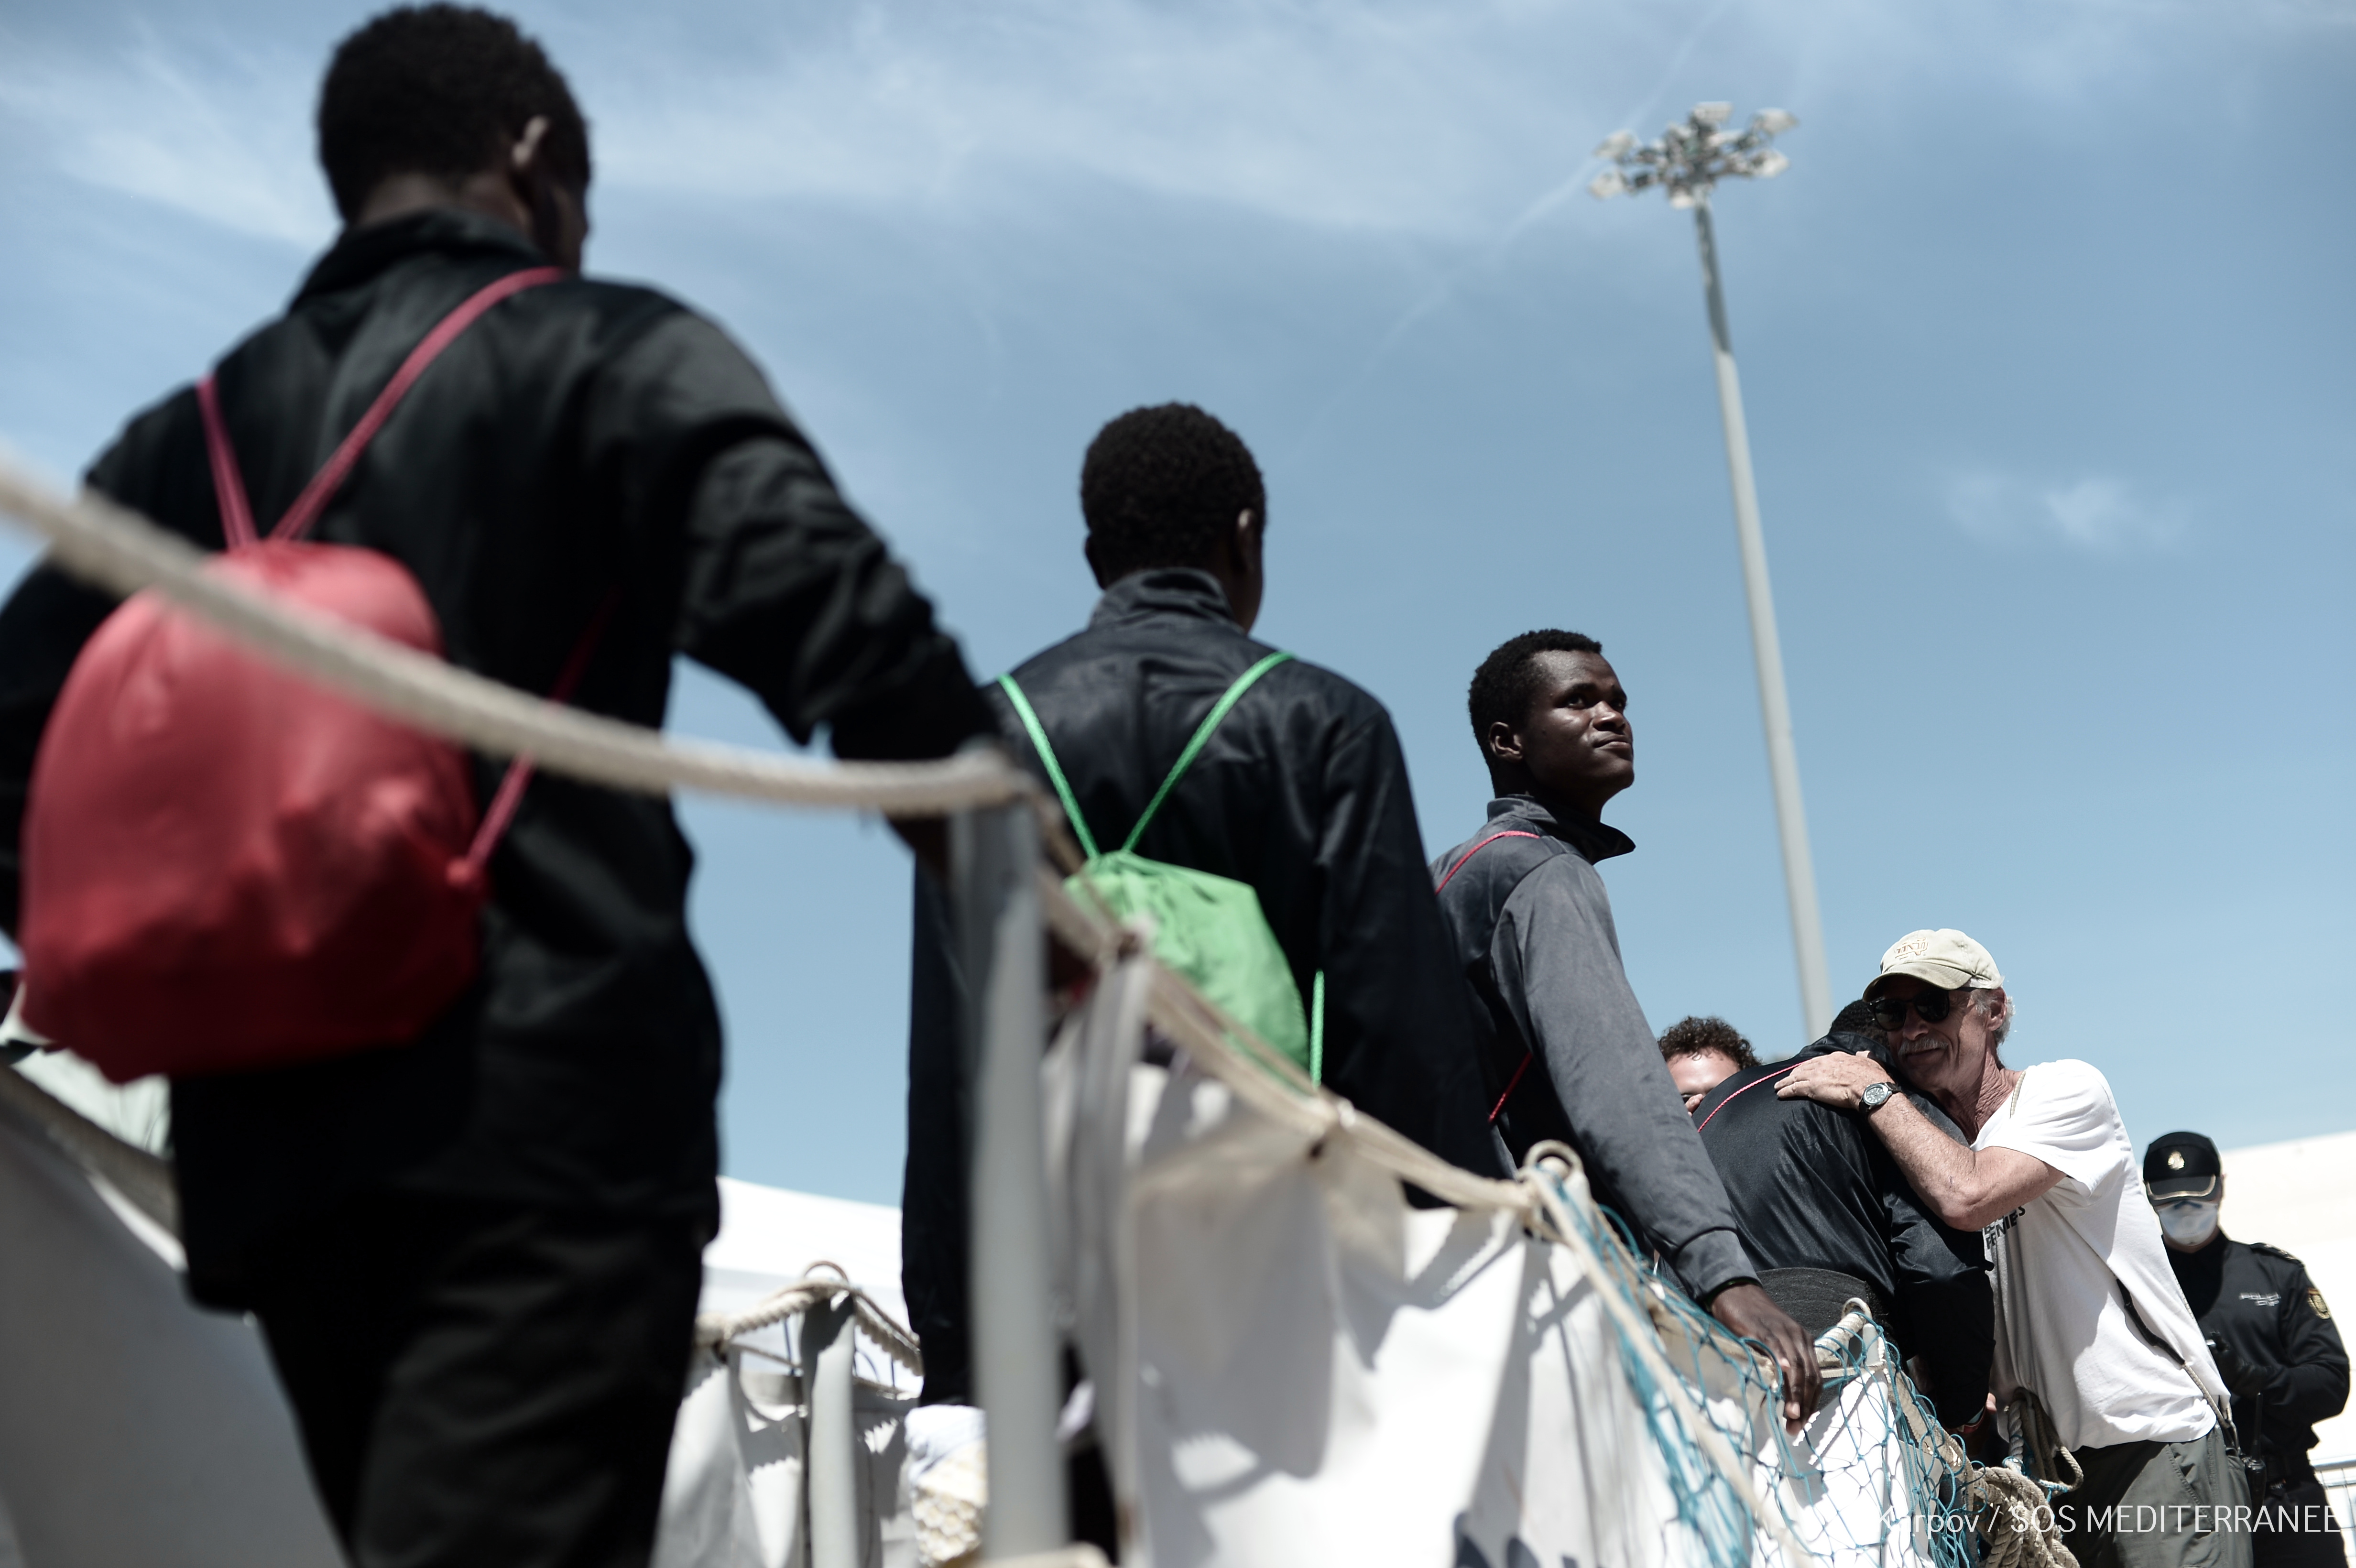 Migrants rescued by the Aquarius arrive in the port of Valencia (by MSF/Kenny Karpov)